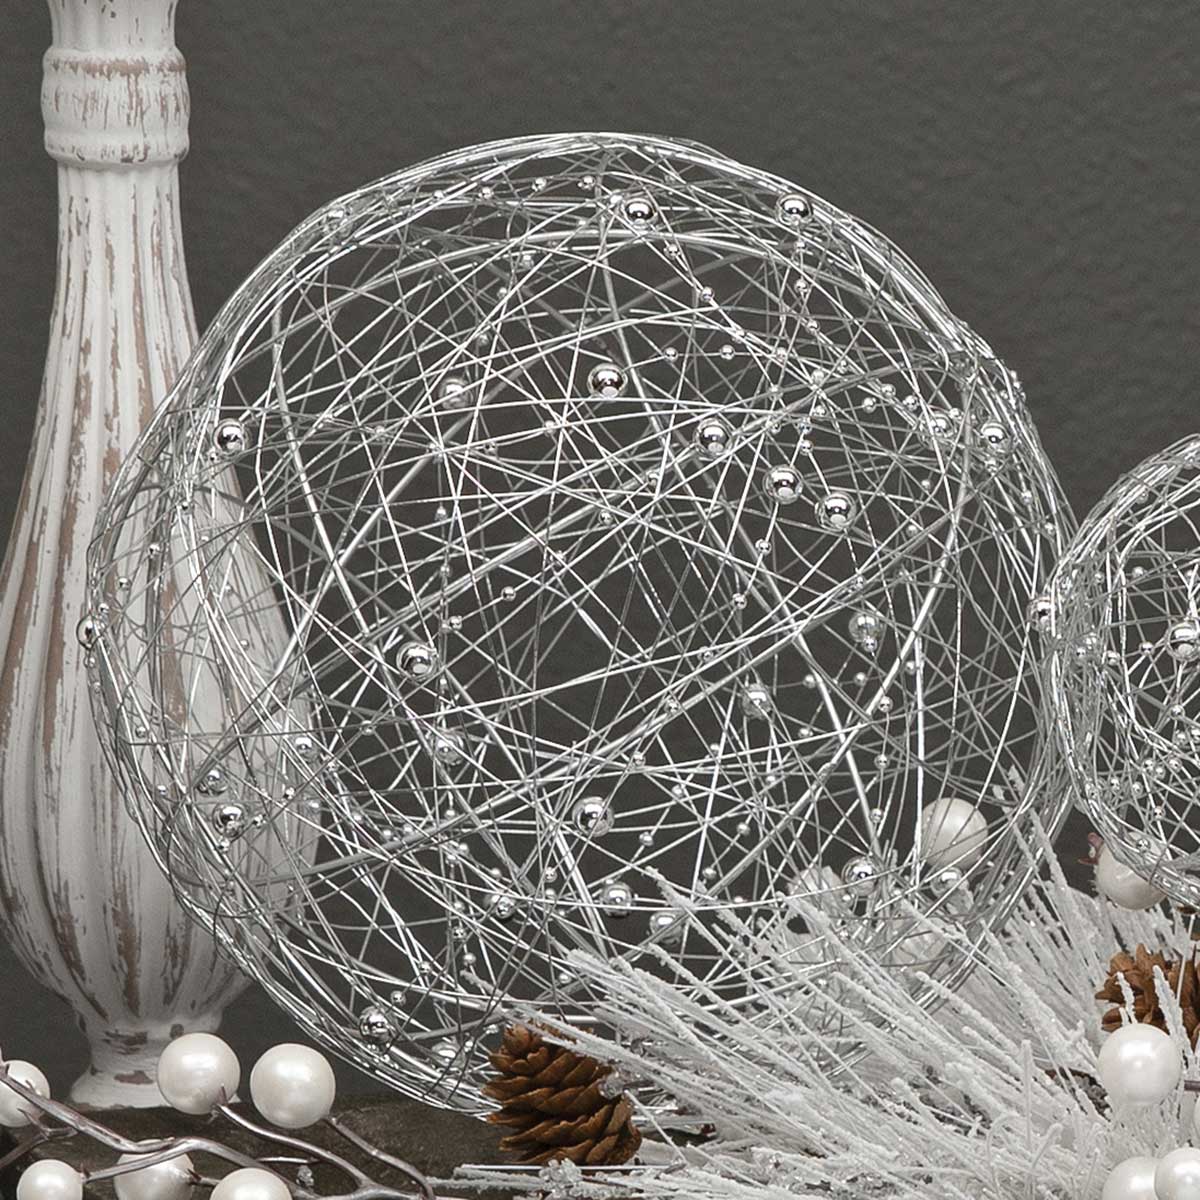 DECORATIVE WIRE BALL SILVER WITH BEADS LARGE 7.5"